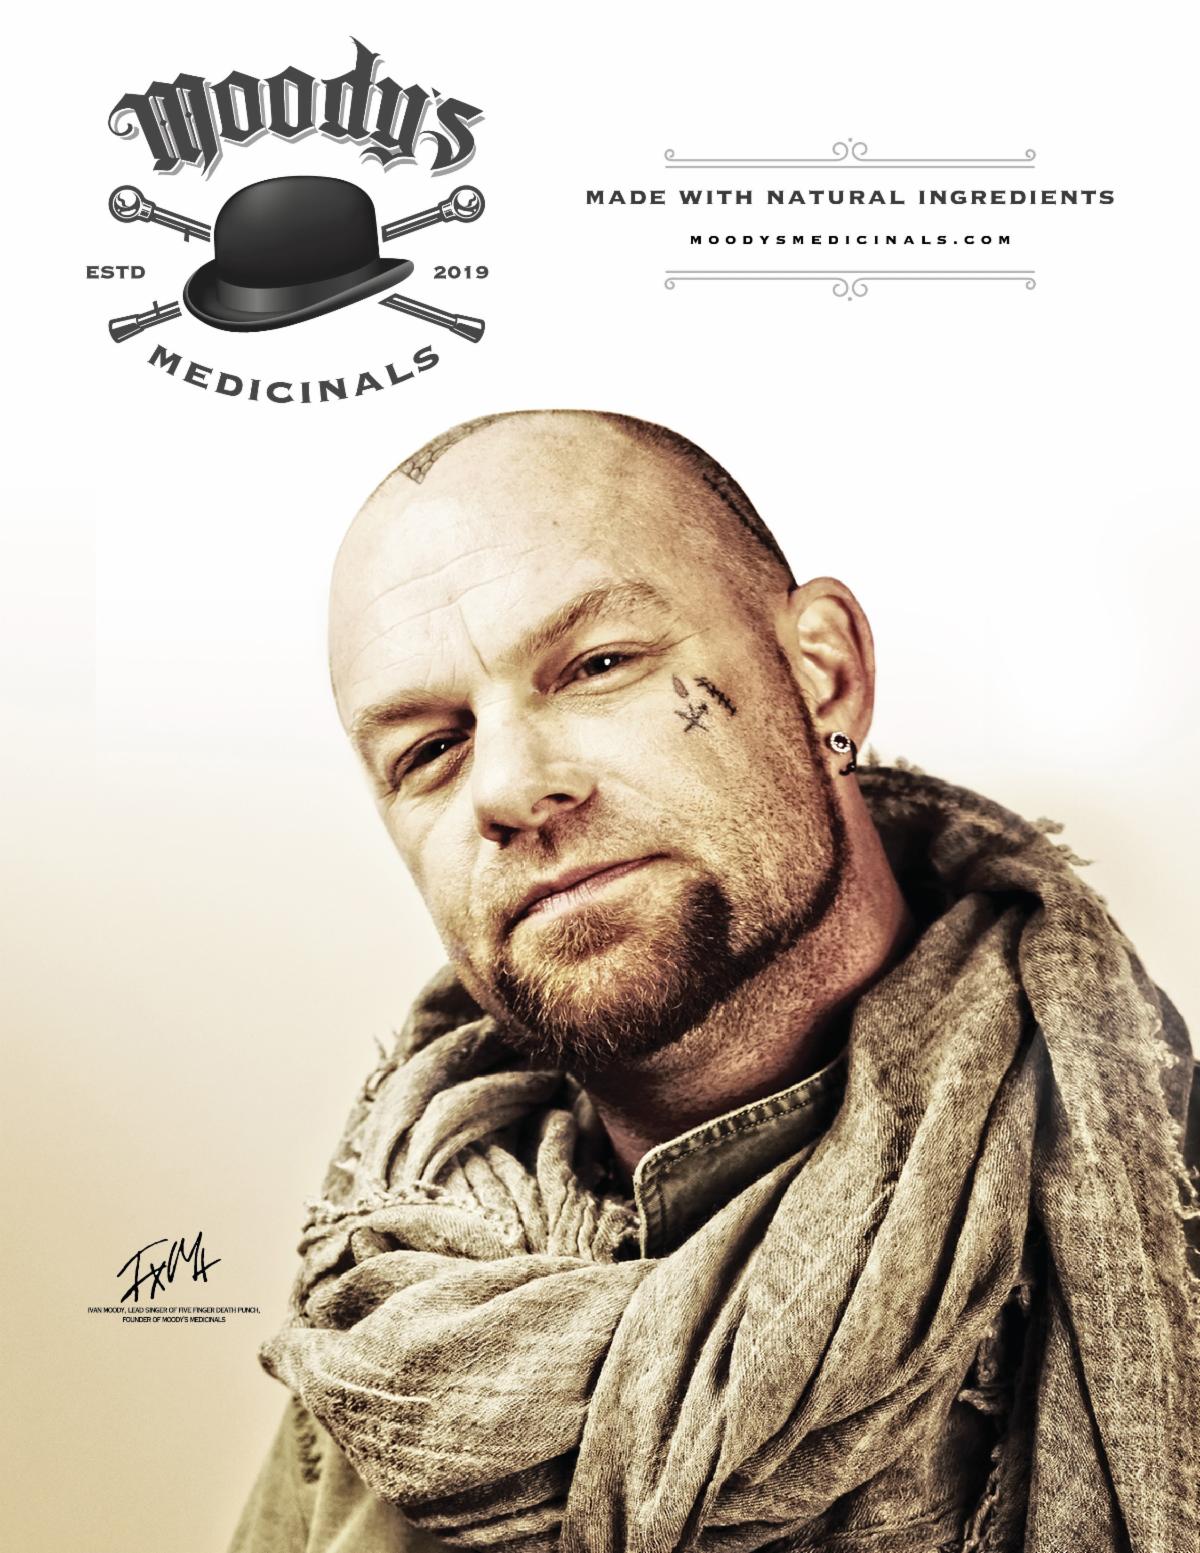 Ivan L. Moody-Lead Singer Of Five Finger Death Punch-To Debut New Products From 'Moody's Medicinals' Line In-person On Saturday, Nov. 2 At The Grove - Las Vegas